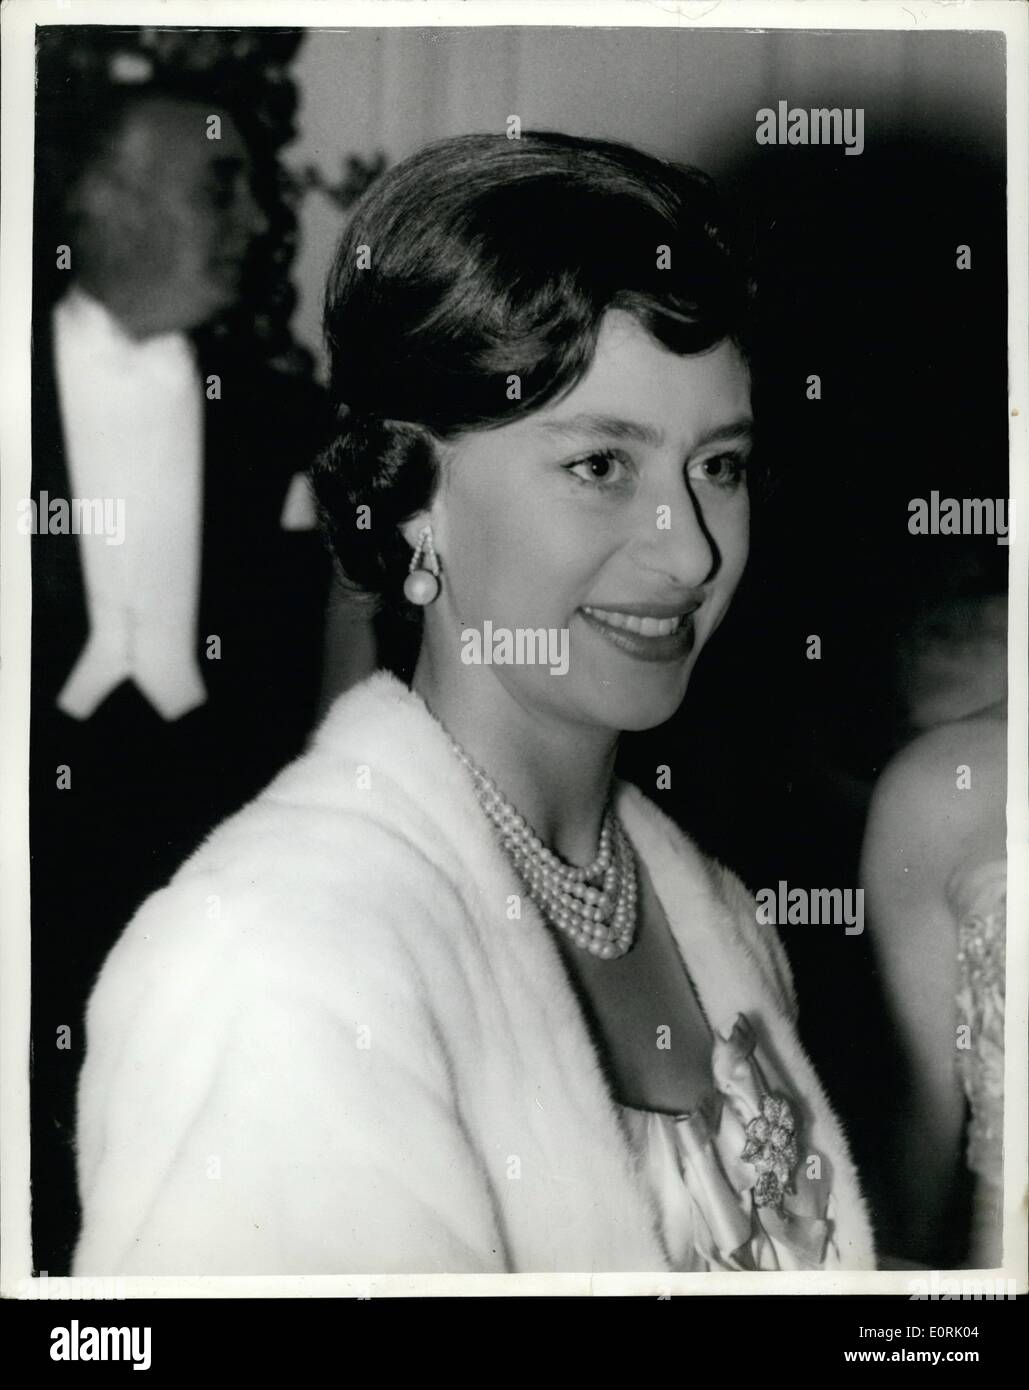 Oct. 10, 1959 - Princess's hair style for the ball. : Photo shows H.R.H. Princess Margaret wearing new hair-style and pearl earrings, pictured as she met other guests at the Dockland Settlements Ball at the Savoy Hotel, London, last night. Stock Photo